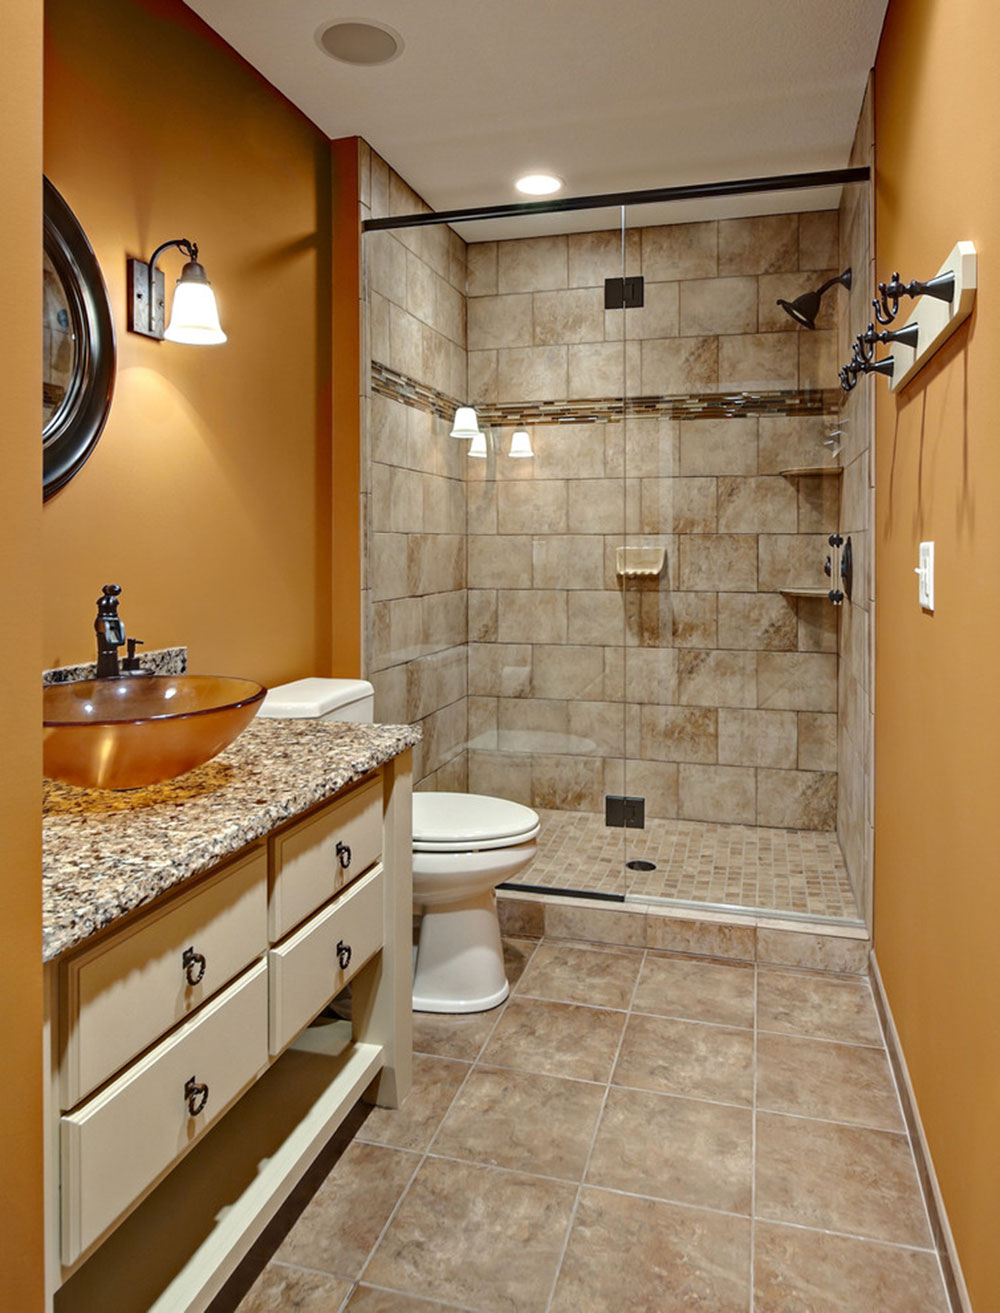 Cost To Add A Bathroom In The Basement, How Much Should A Basement Bathroom Cost